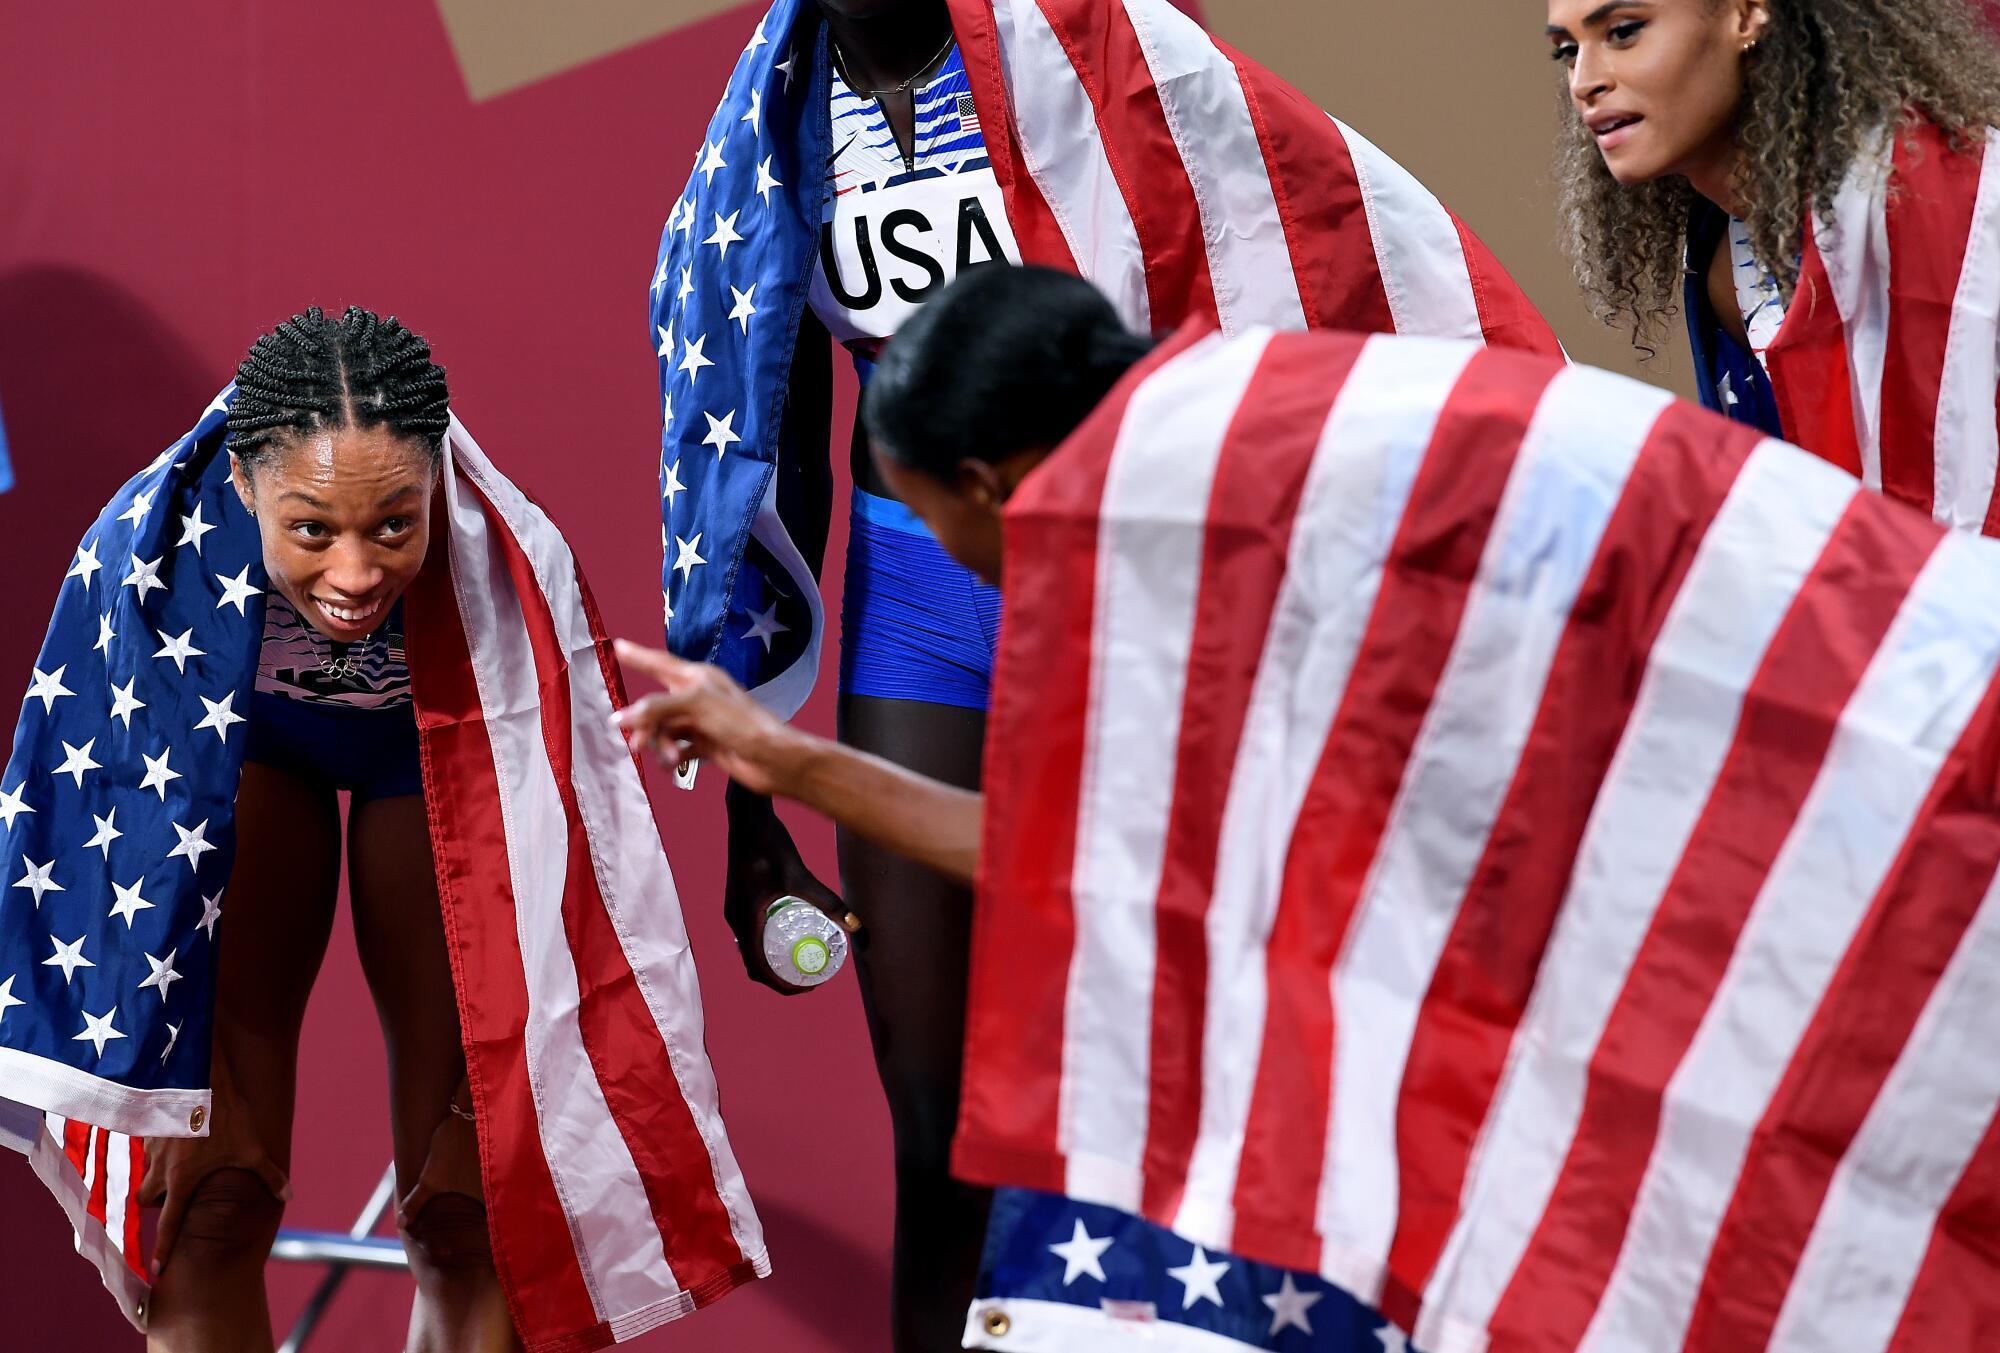  USA's Allyson Felix smiles after winning the gold medal in the 4X400 relay.